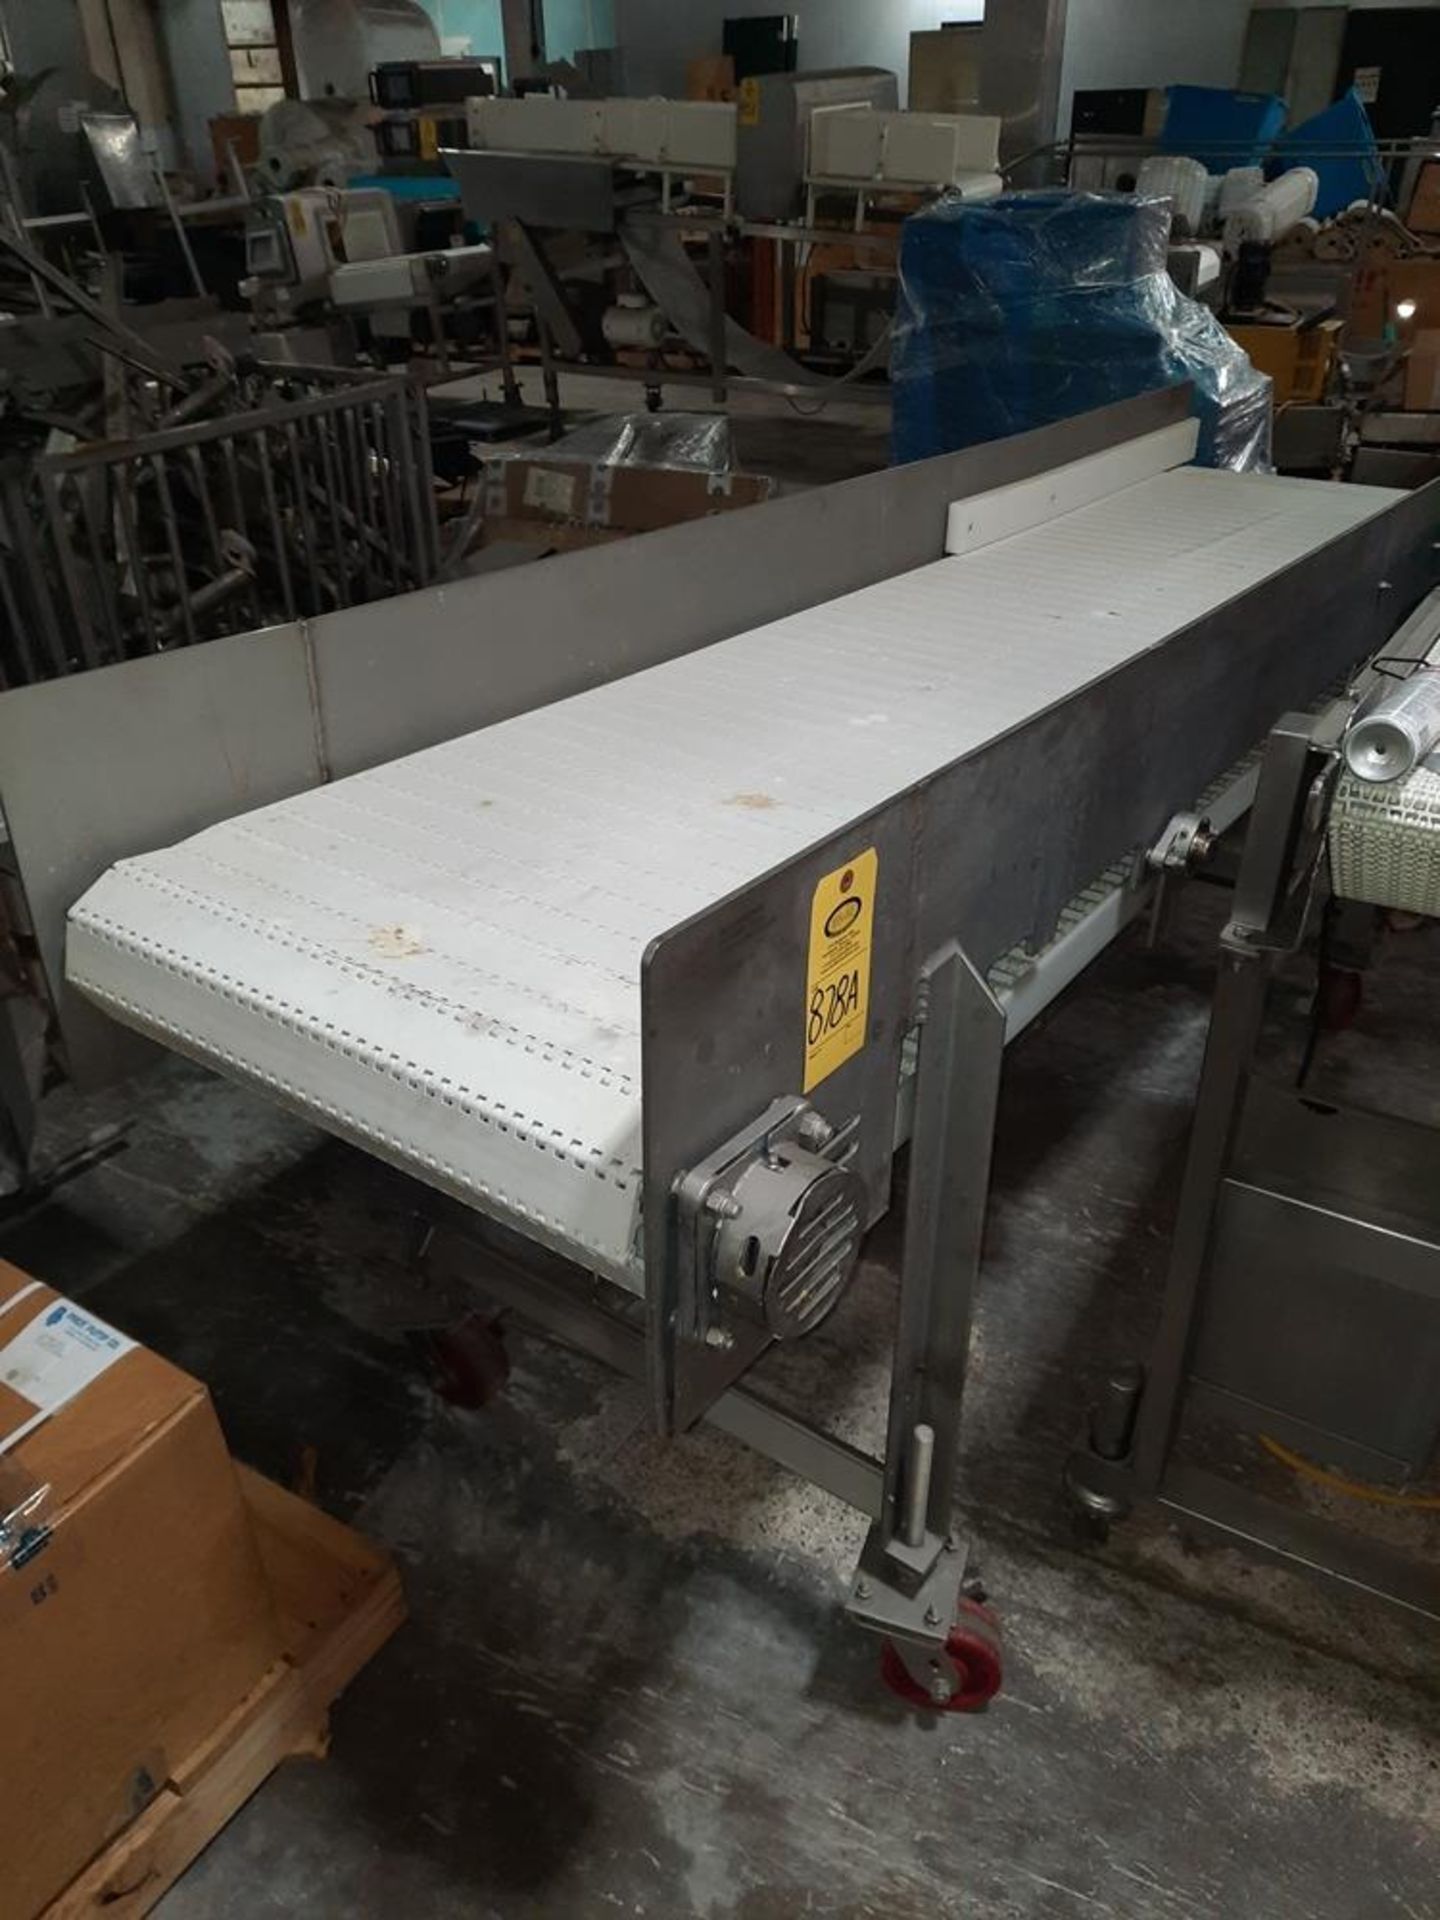 Stainless Steel Conveyor, 24" W X 102" L plastic belt: Required Loading Fee $150.00, Rigger-Norm